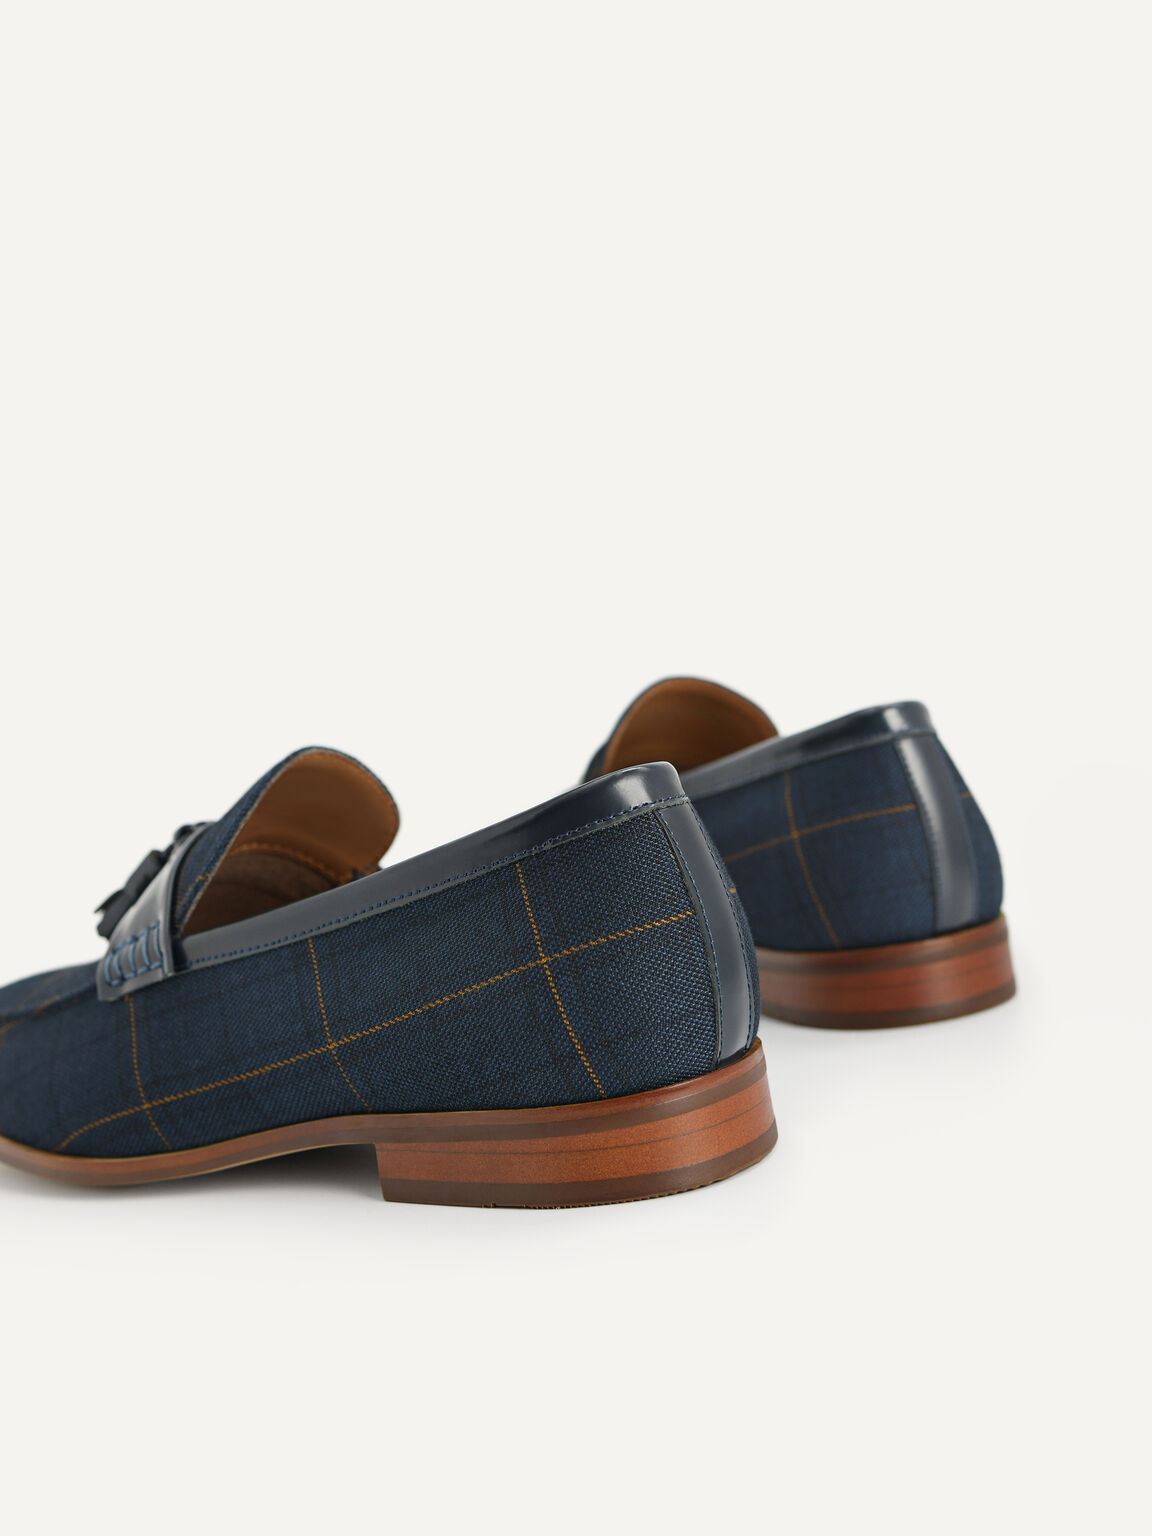 Leather Tasselled Loafers, Navy, hi-res